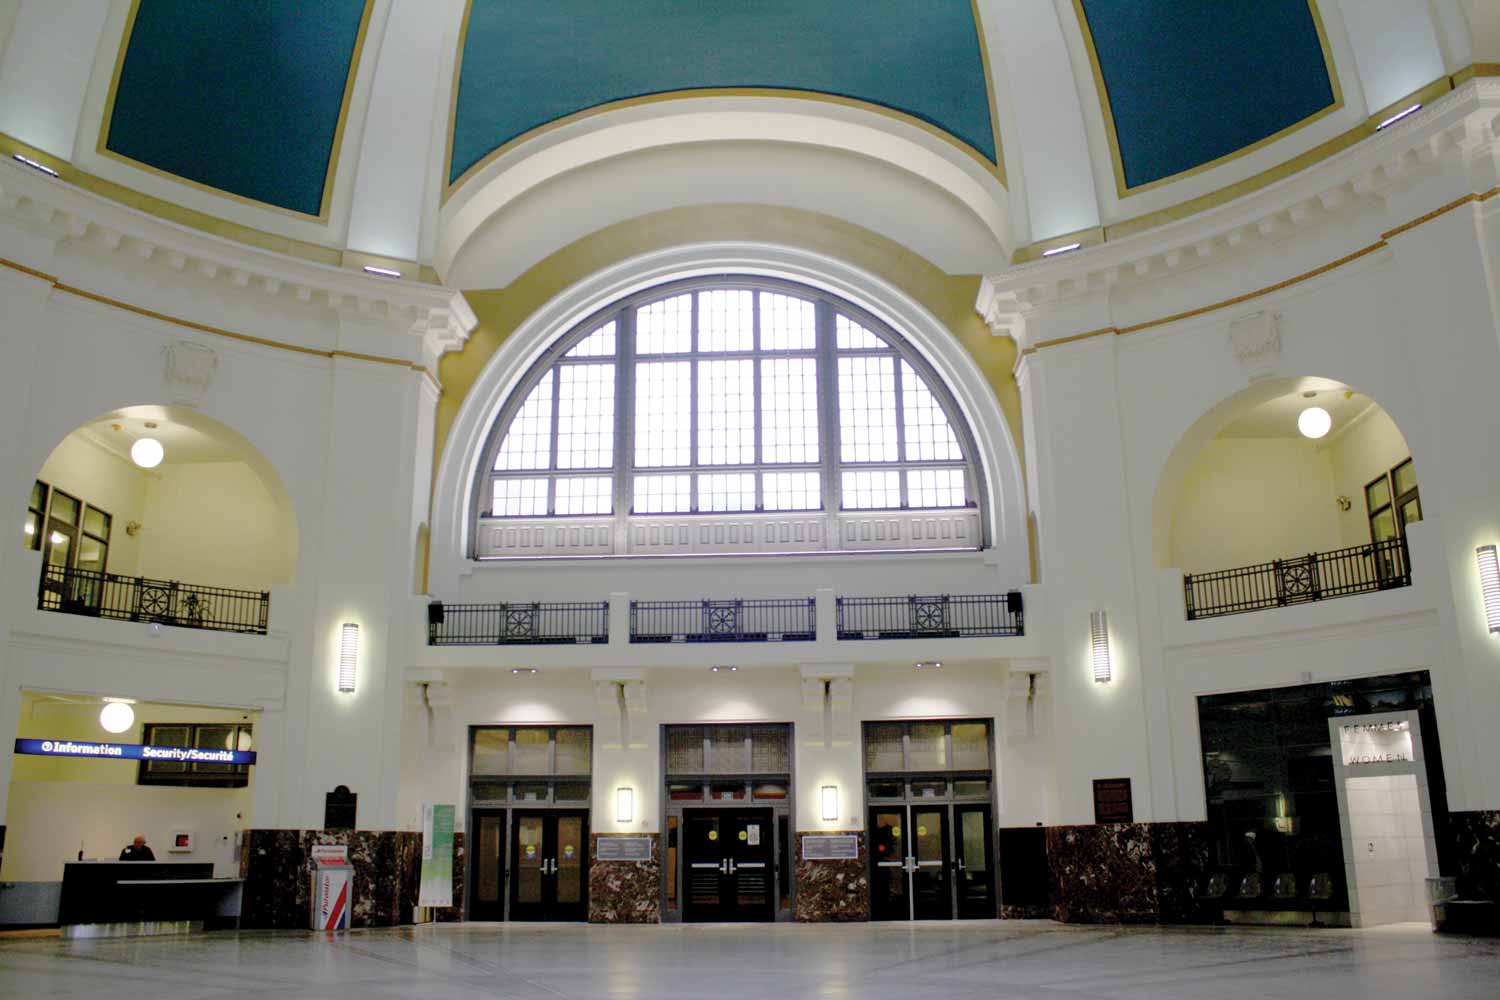 A modern photo of the rotunda in 2015. A large semicircular window and arches are in the center above doorways. An information desk can be seen on the left.